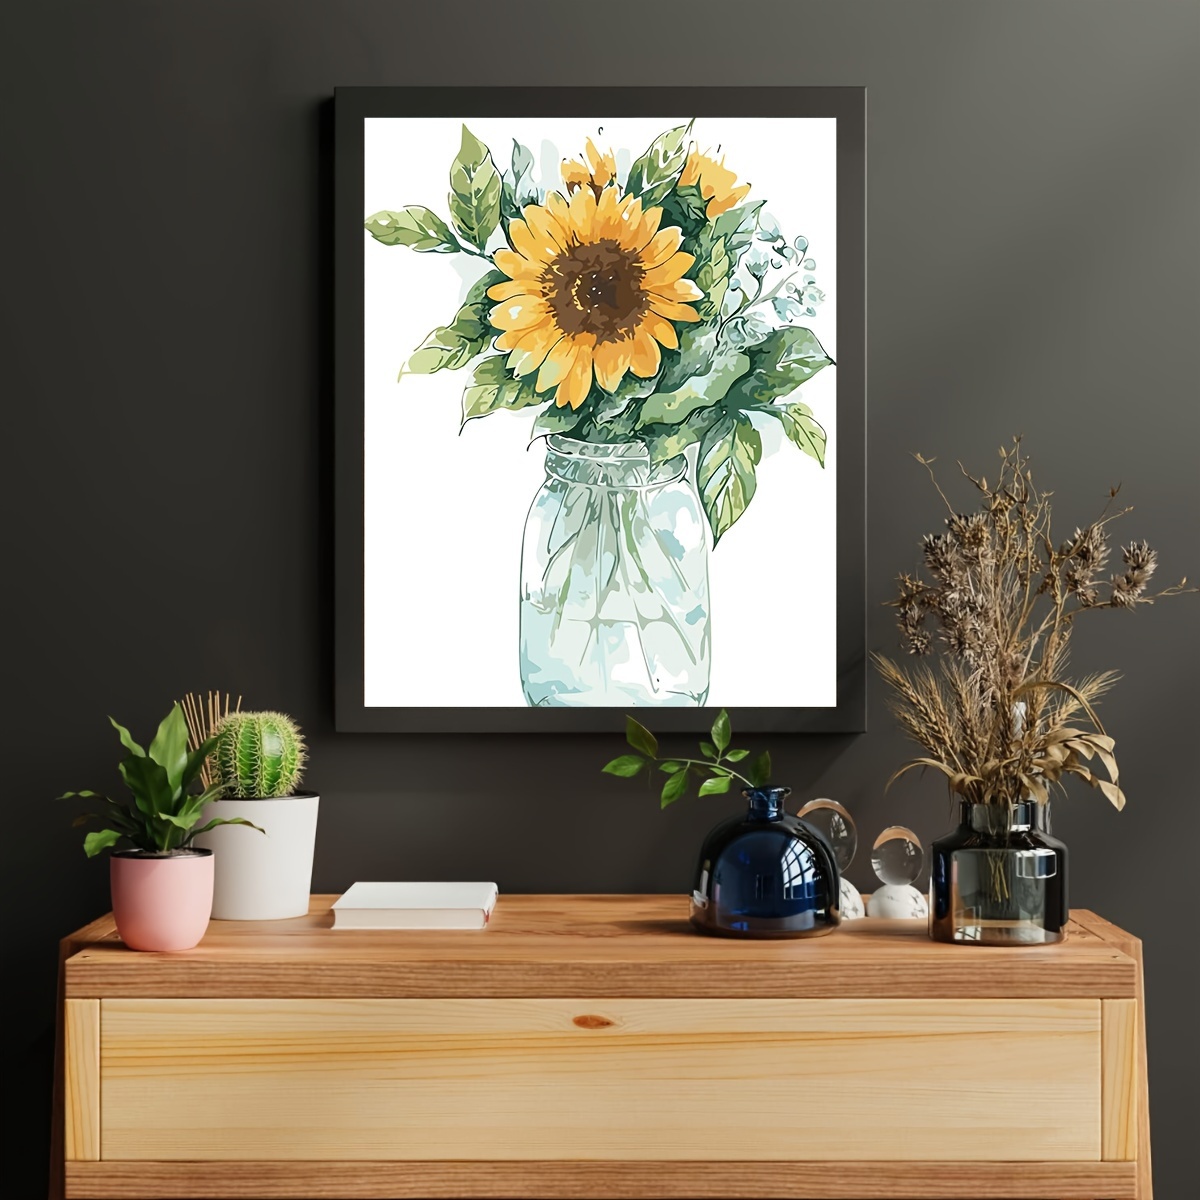 TONZOM Paint by Numbers Kits DIY Oil Painting for Kids, Students, Adults Beginner - Sunflower by Van Gogh 16 x 20 inch with Brushes and Acrylic